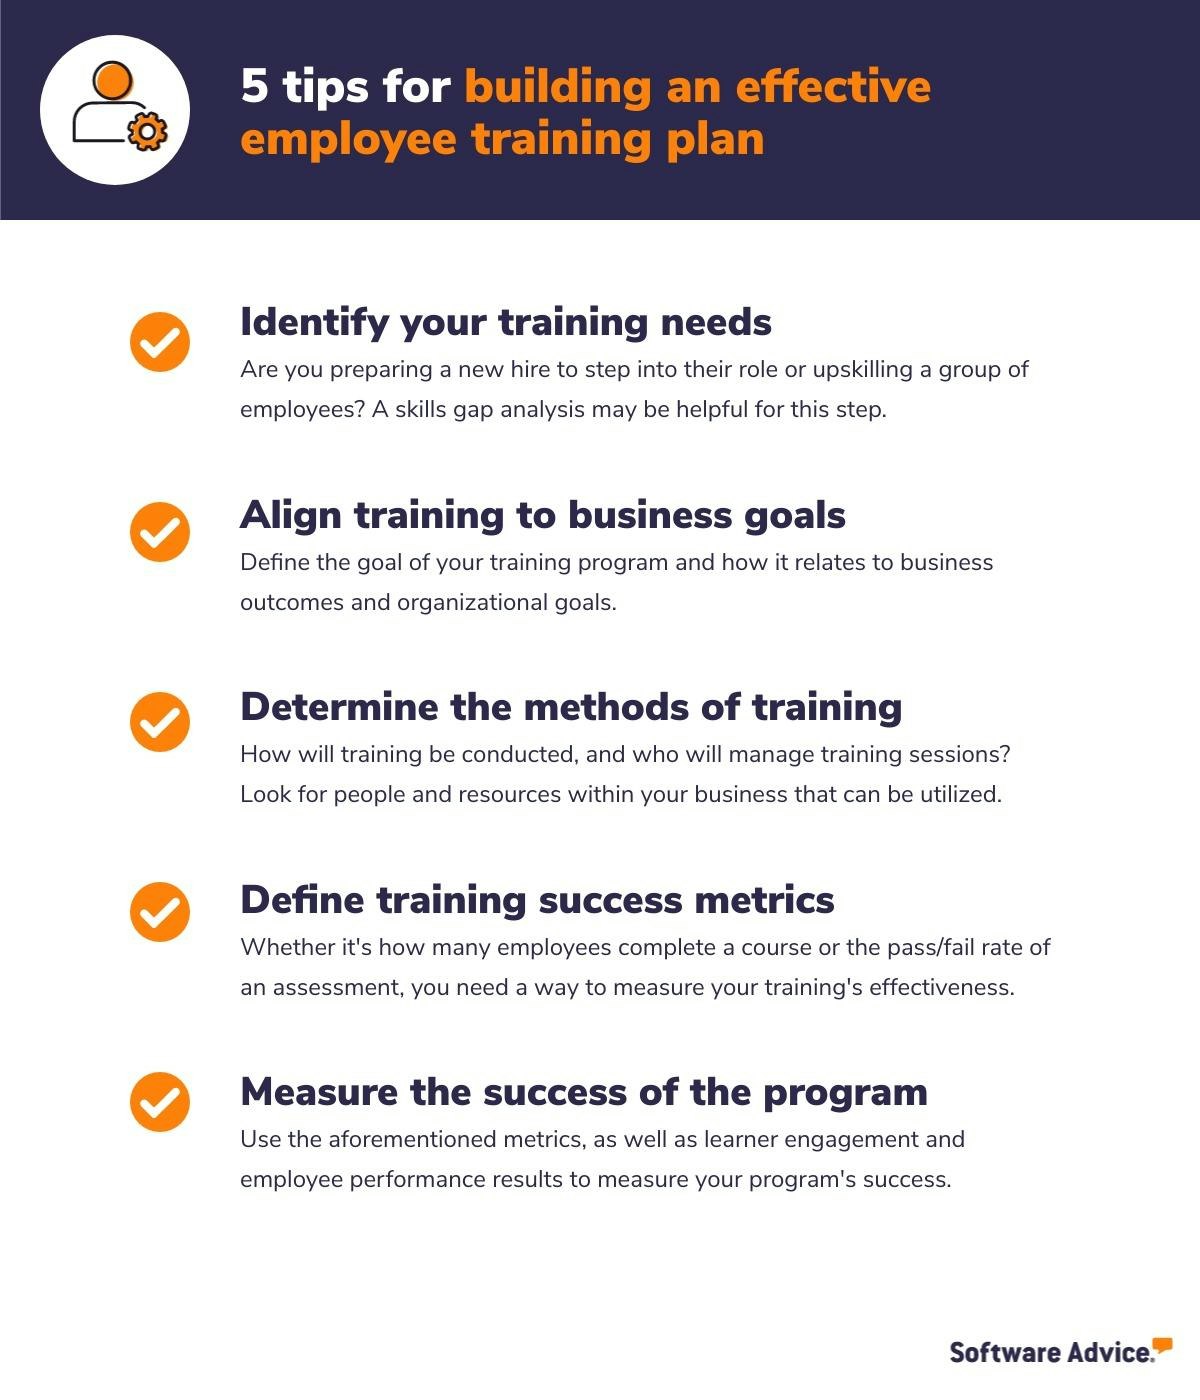 5-tips-for-building-an-employee-training-plan